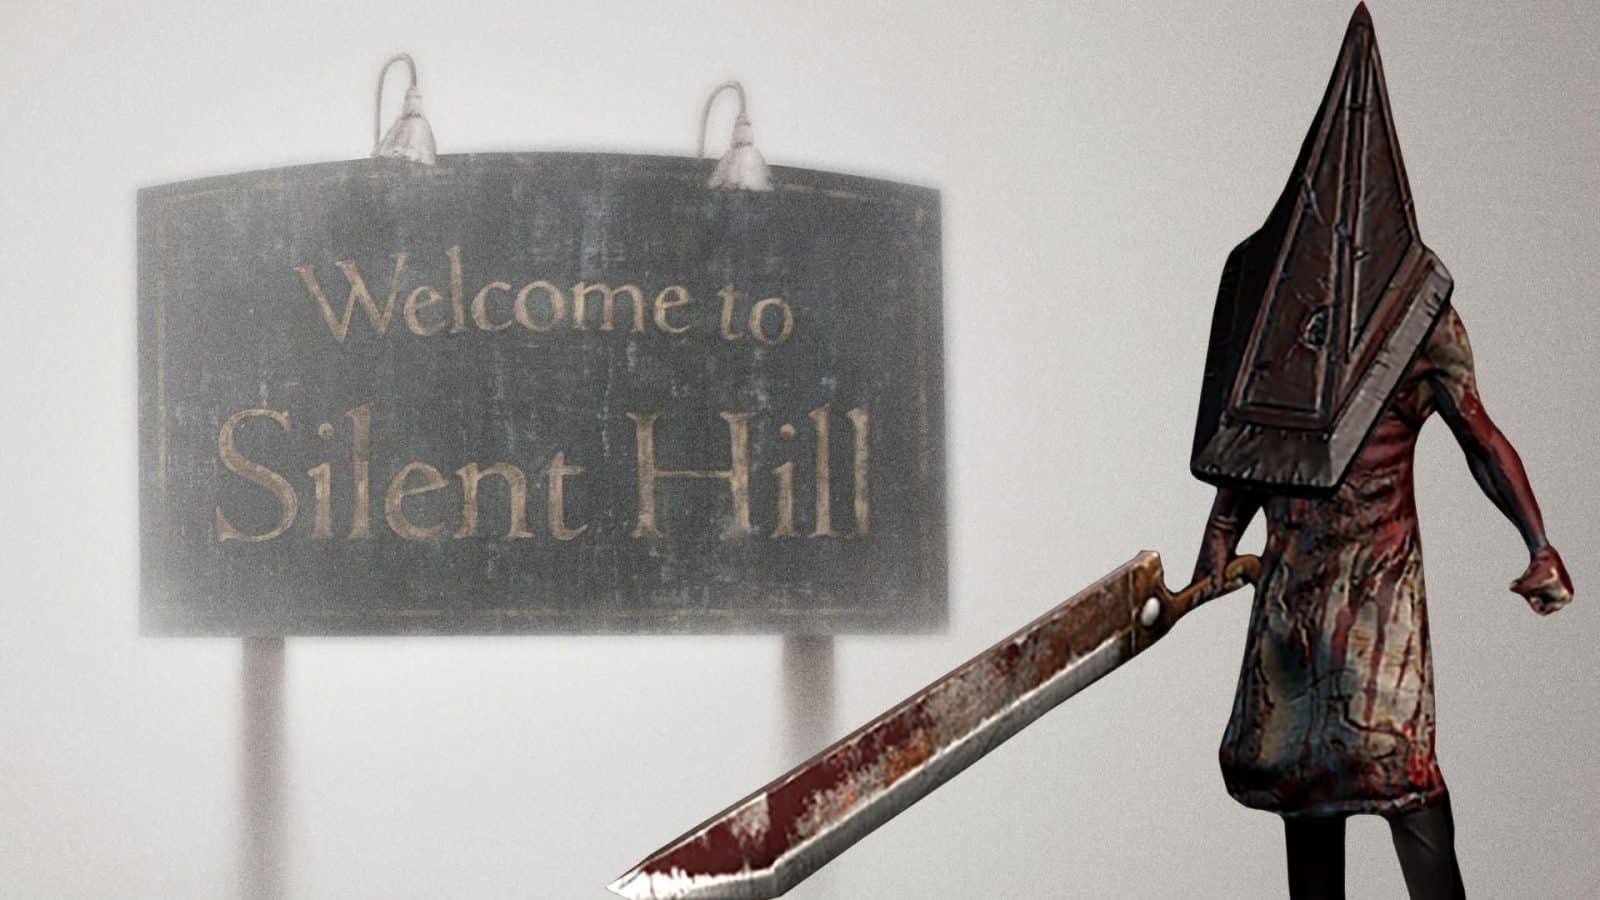 Silent Hill 2 Remake could launch much sooner than expected, Gaming, Entertainment